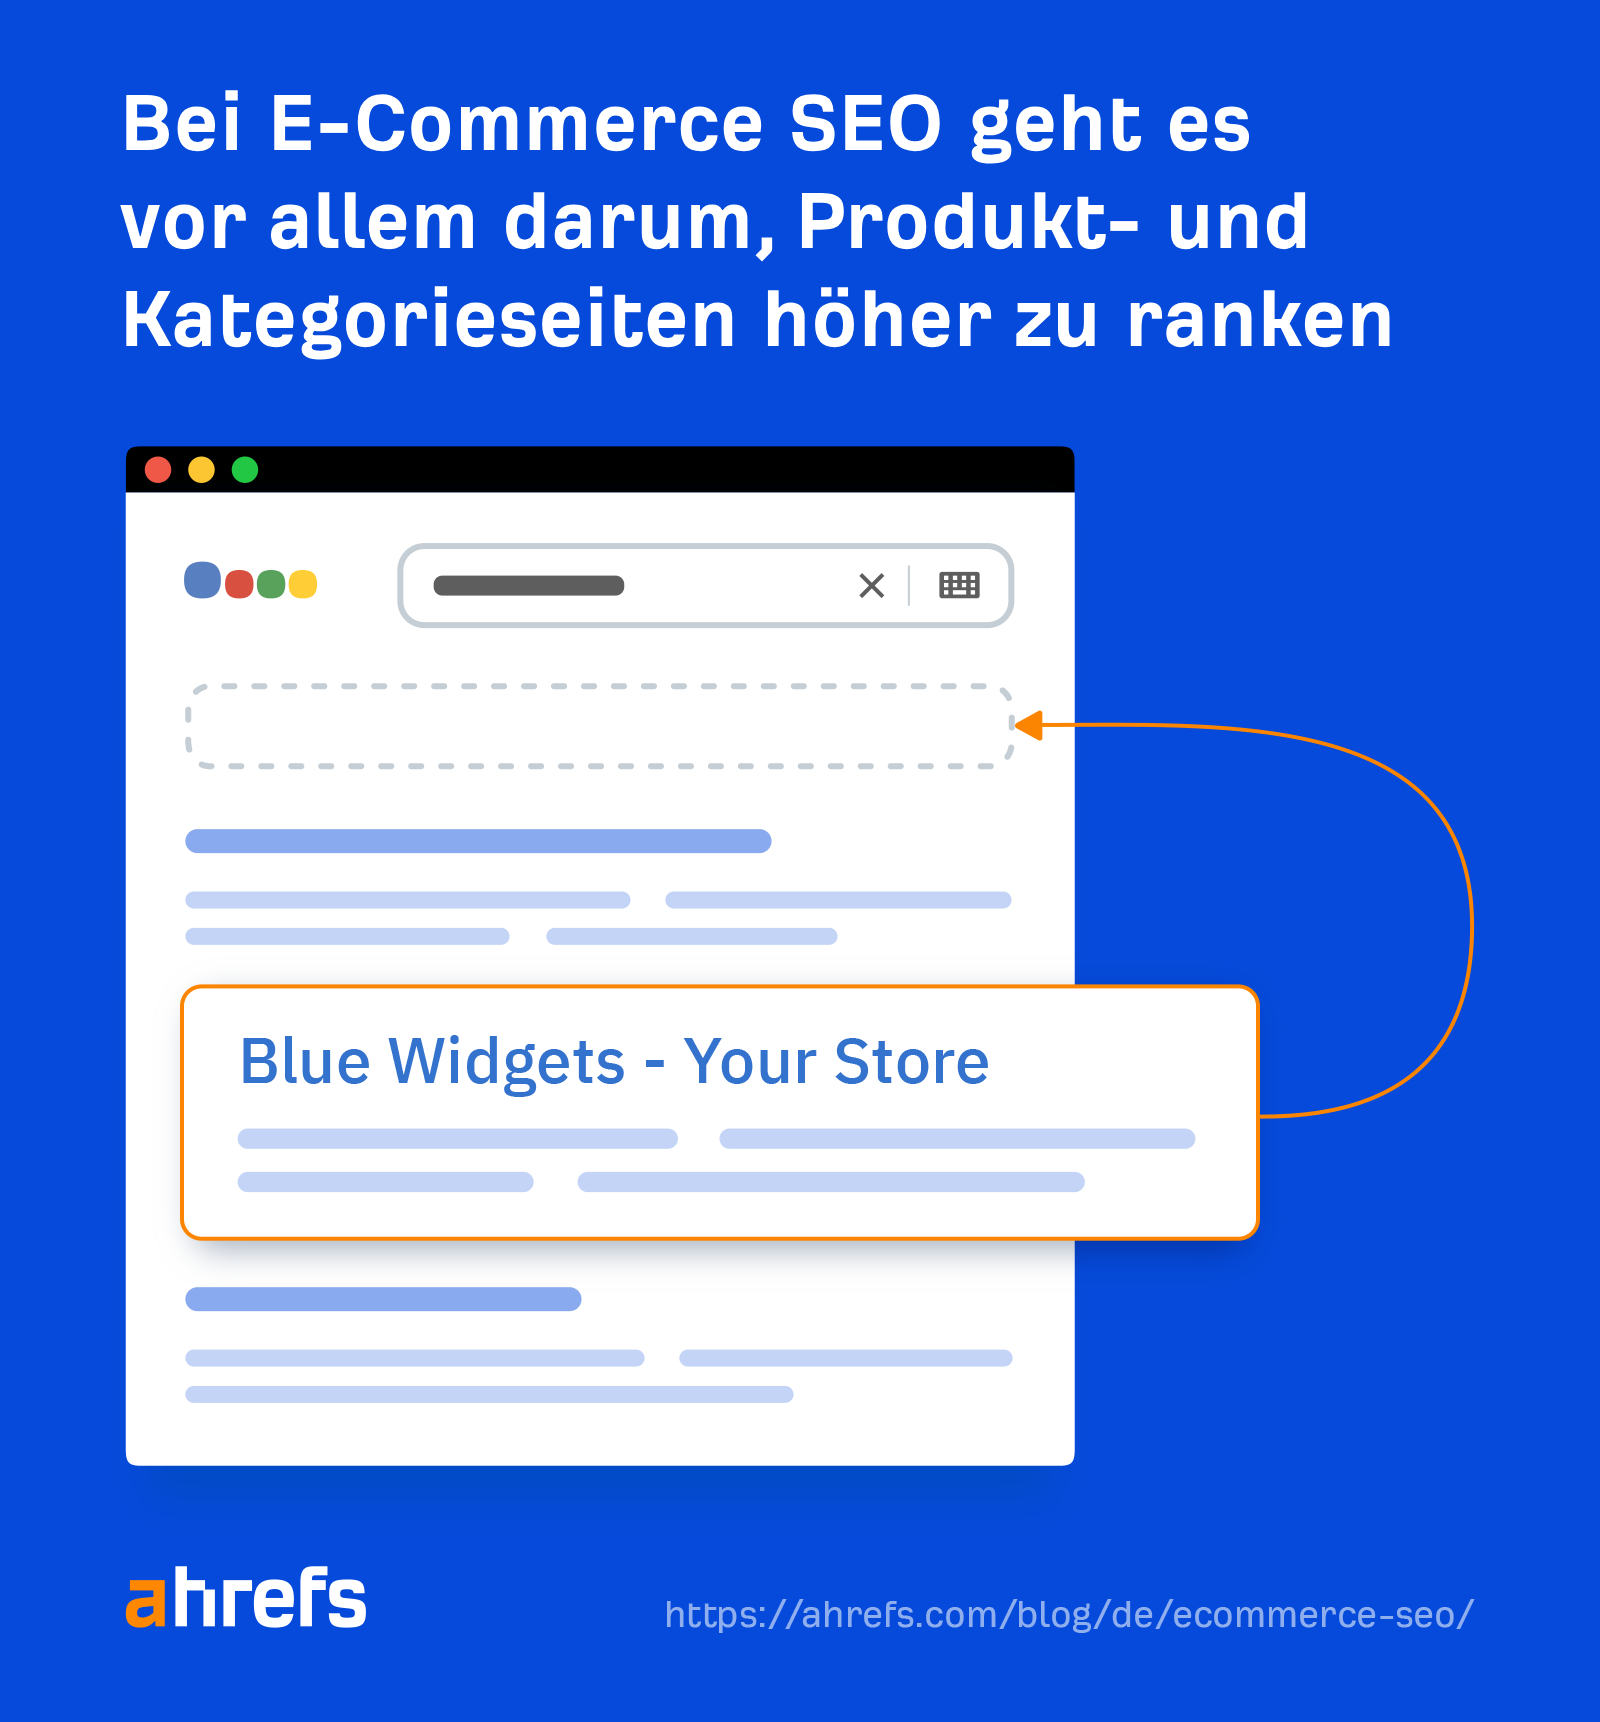 E-commerce SEO is mostly about ranking product and category pages higher